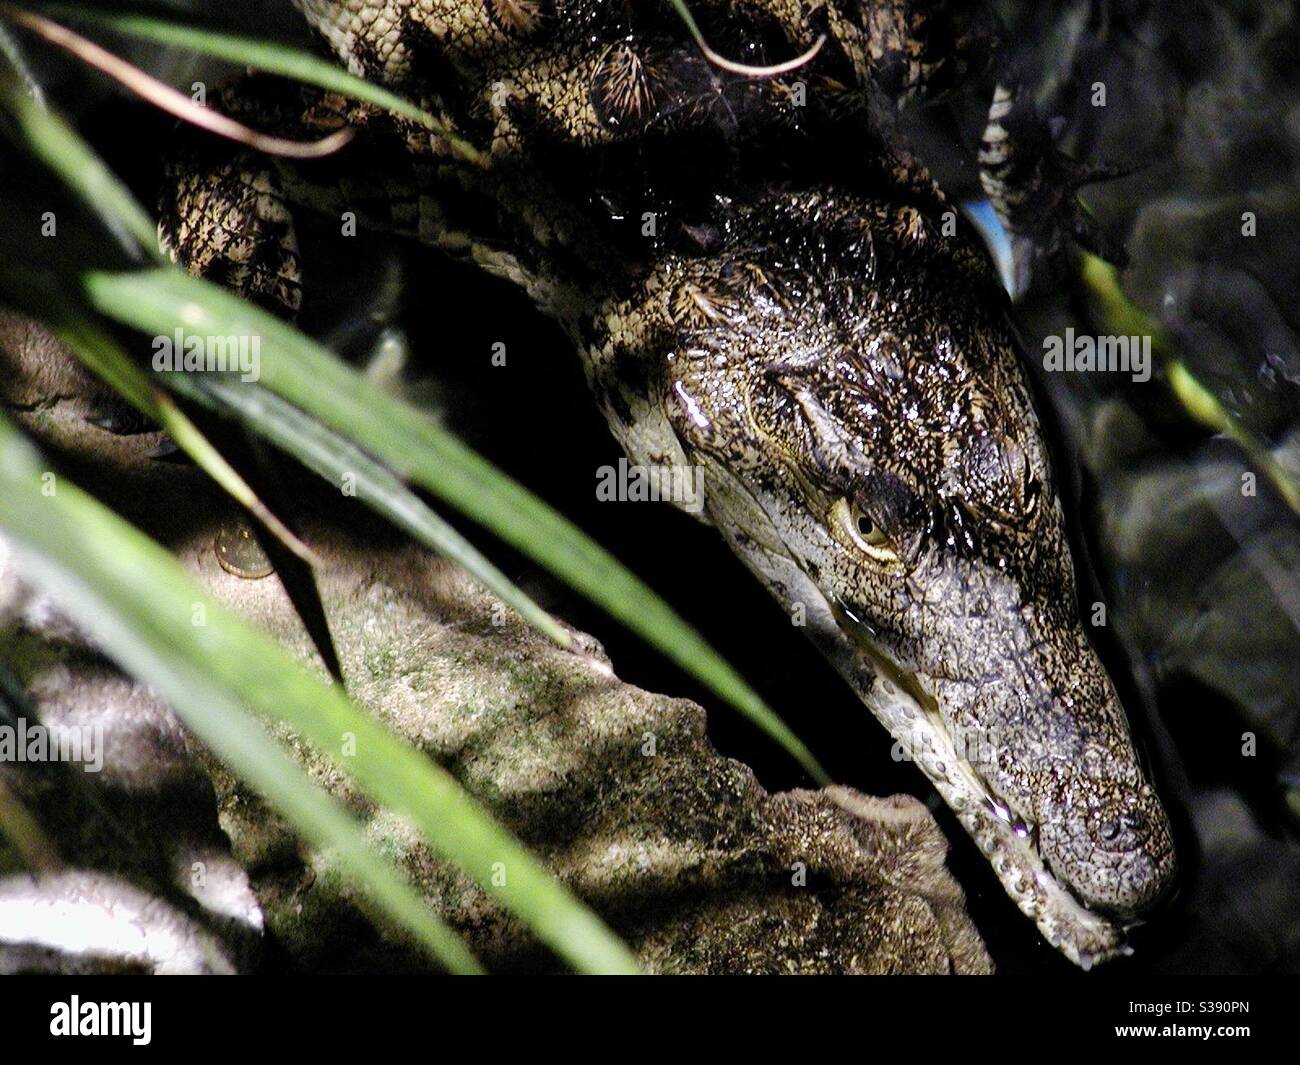 Crocodile is large semi aquatic reptile that live throughout the tropics in Africa, Asia, the Americas and Australia. Stock Photo